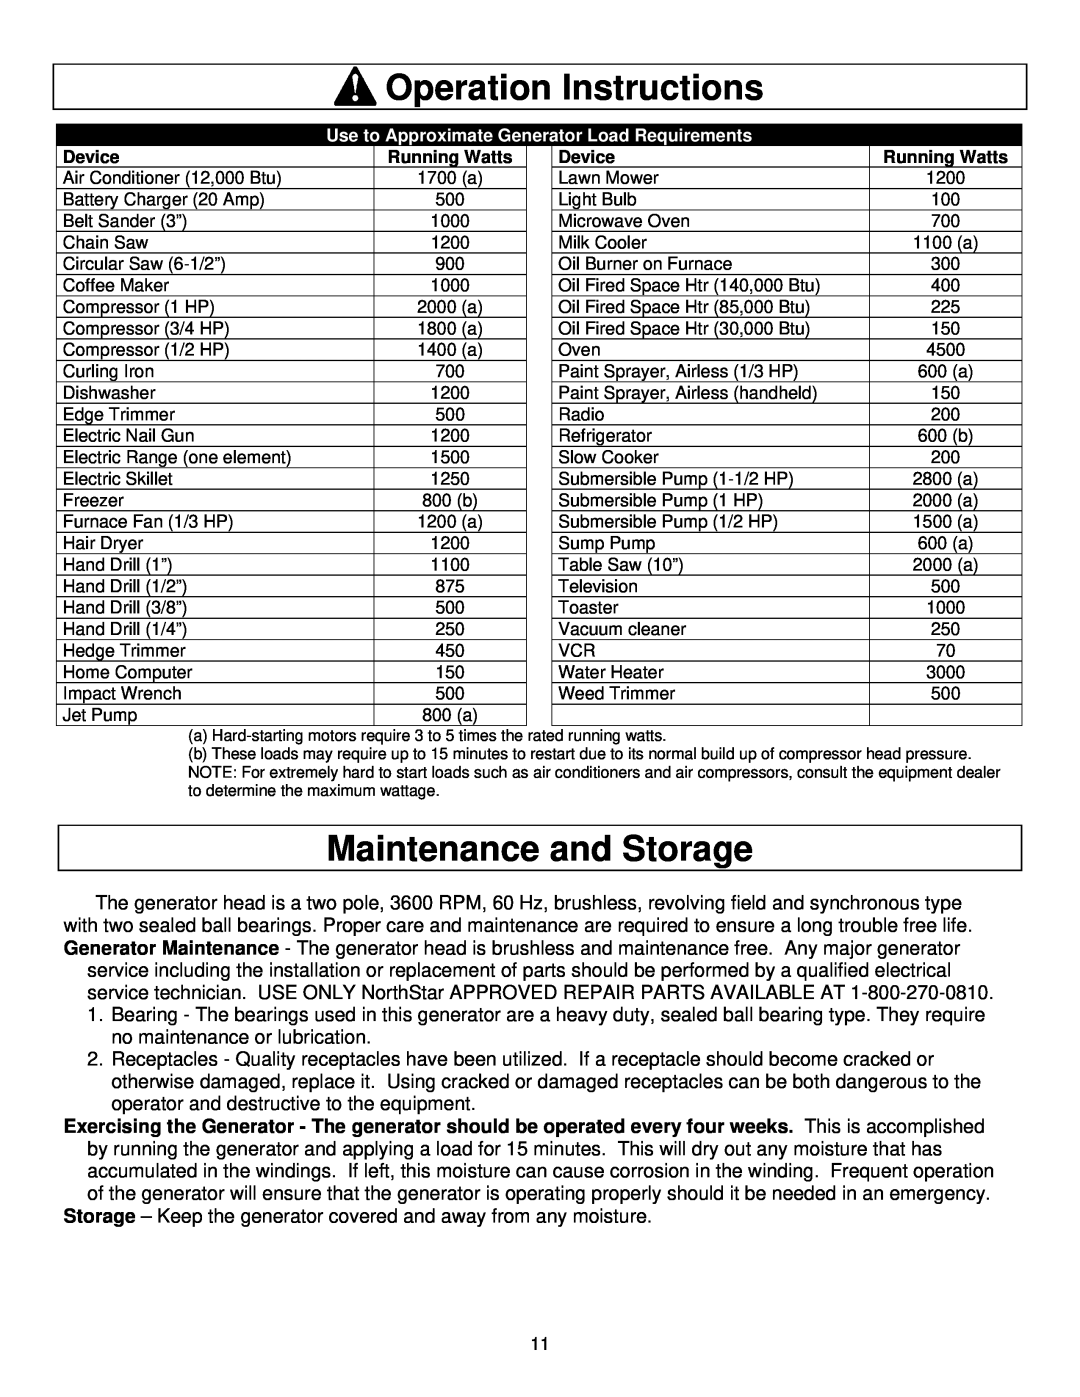 North Star M165951C owner manual Maintenance and Storage, Operation Instructions 